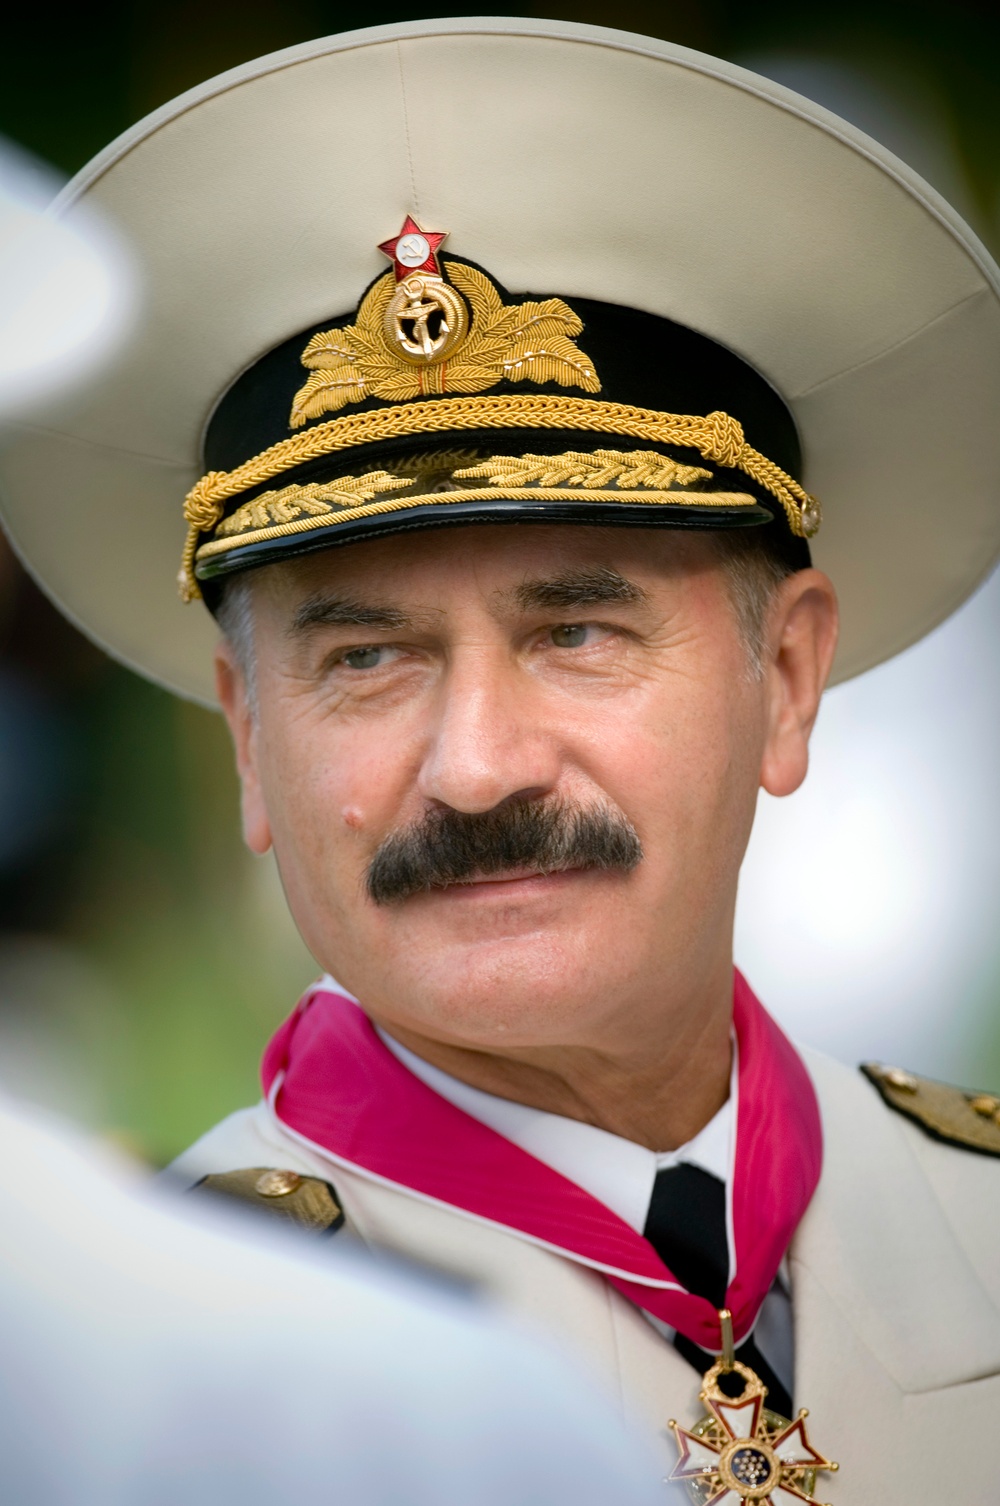 CNO welcomes Russian Navy Commander-in-Chief